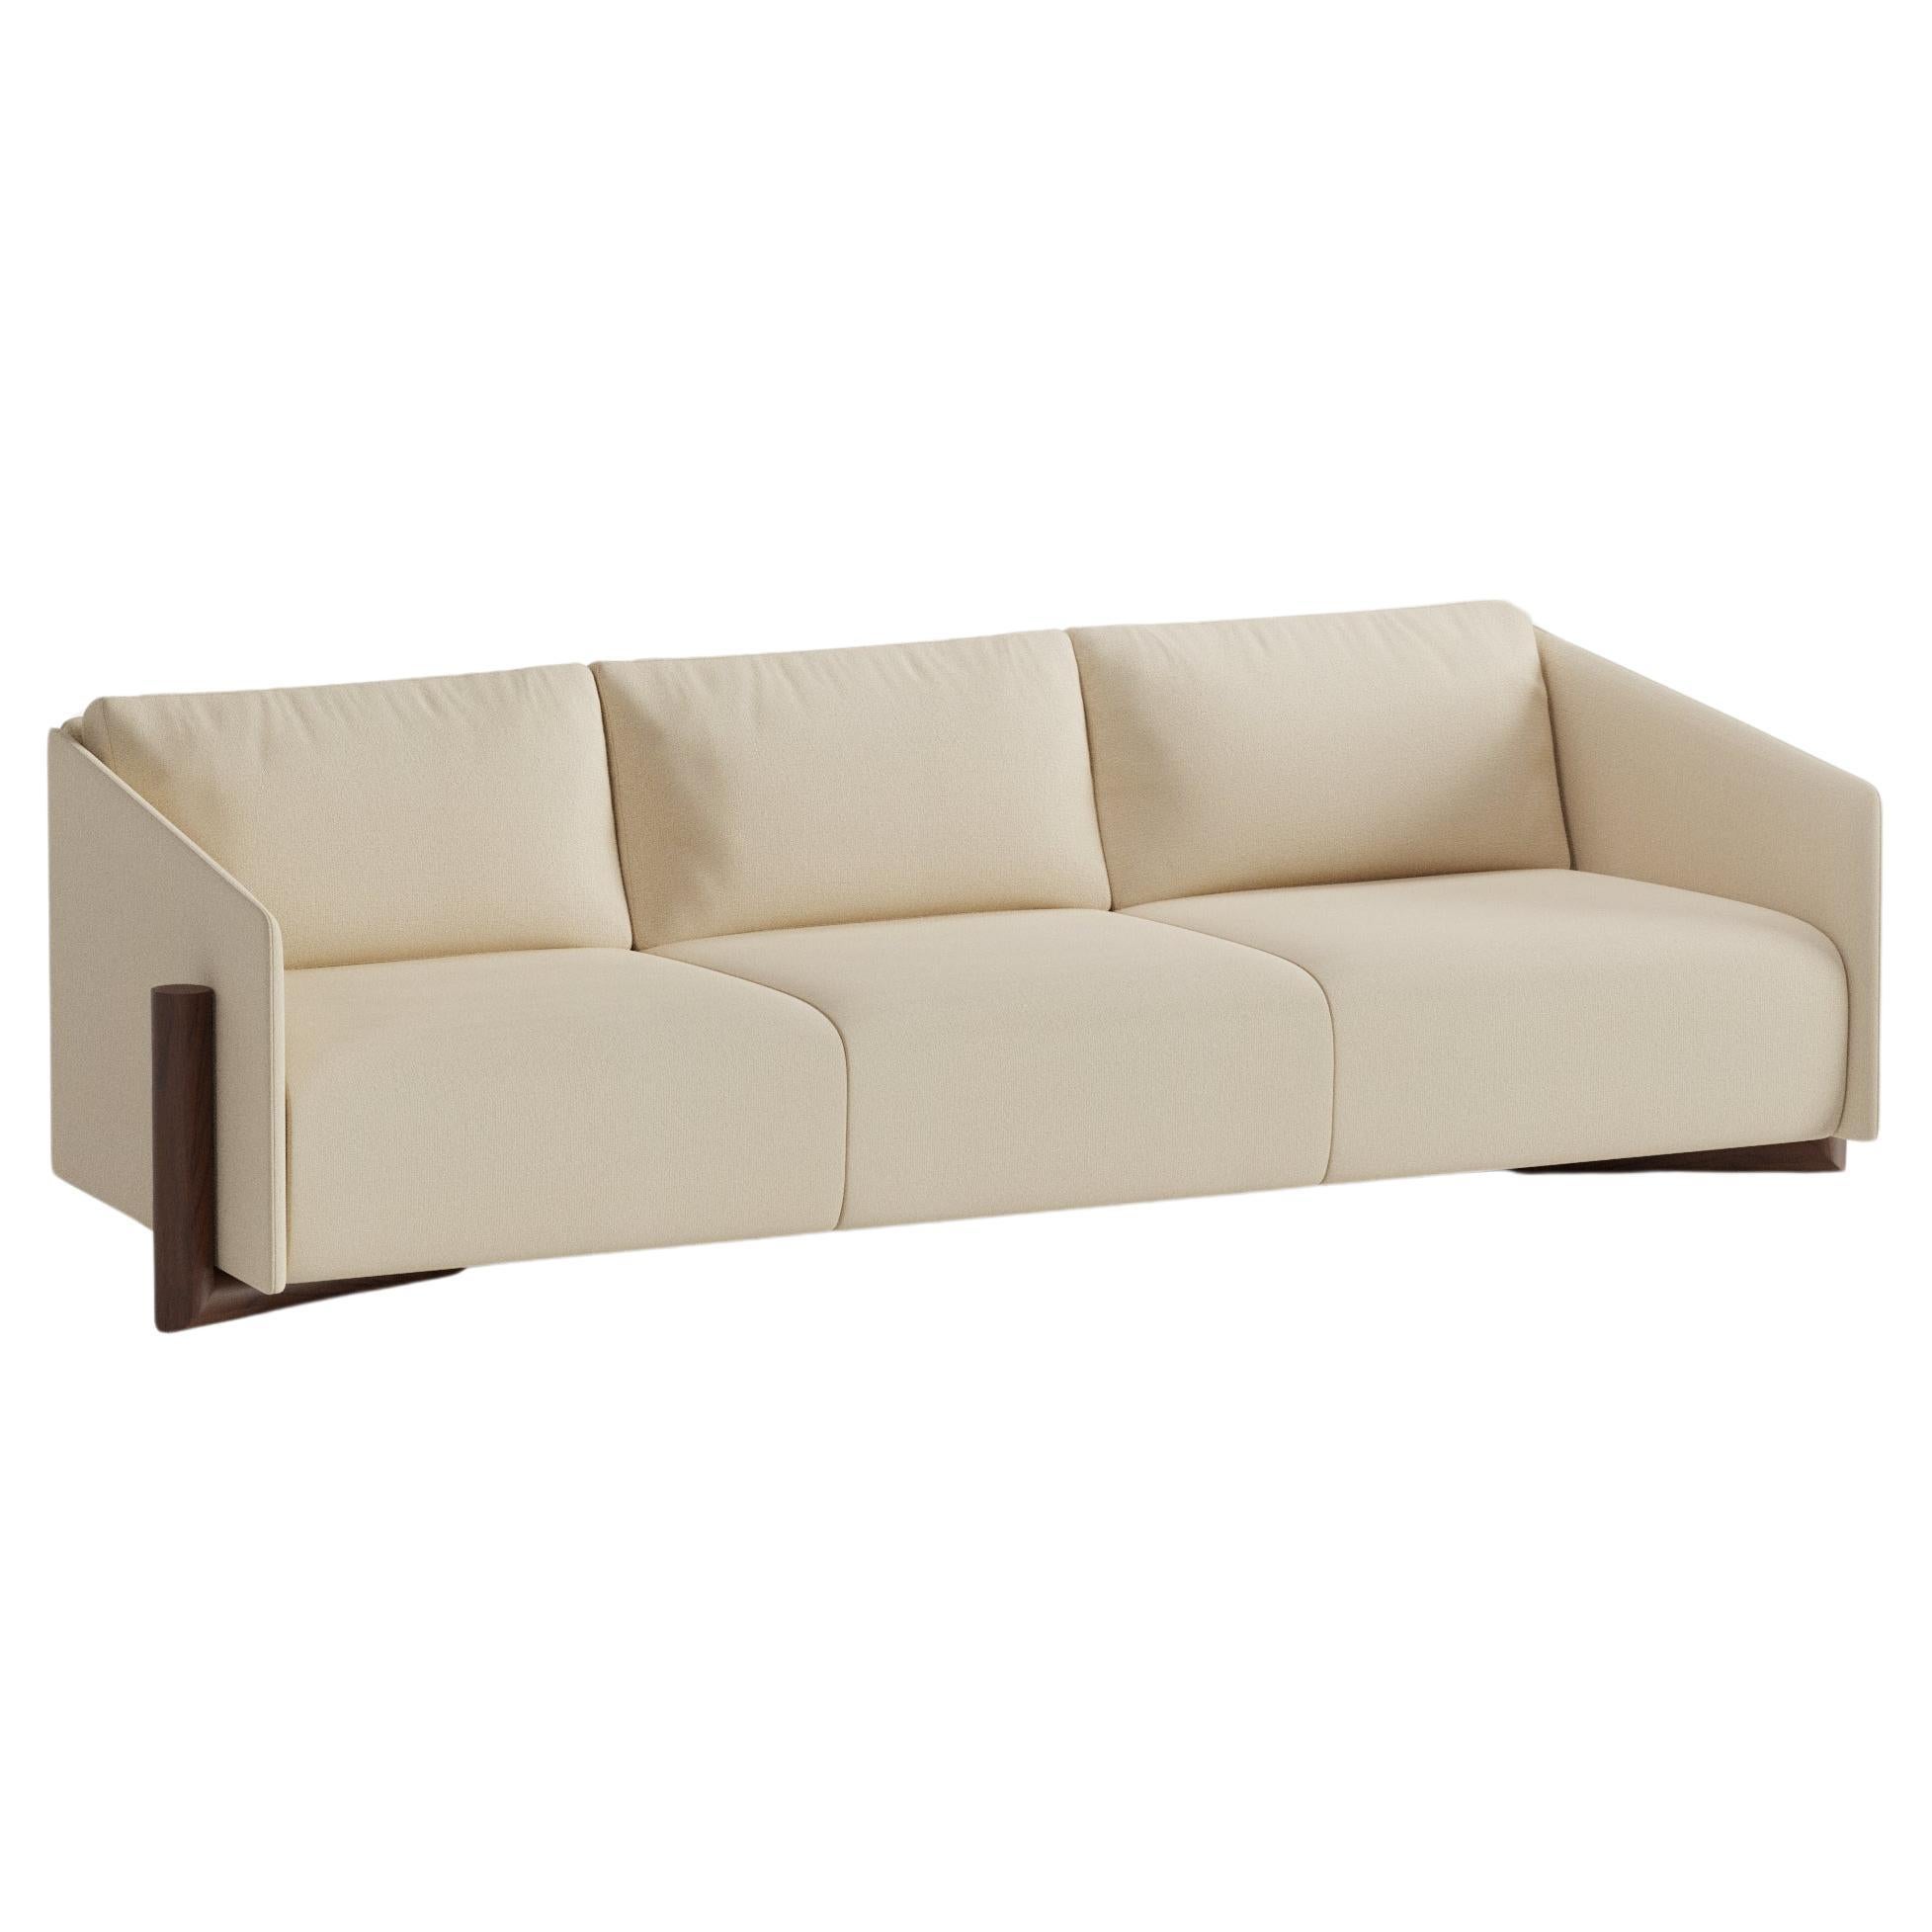 Cream Timber 4 Seater Sofa by Kann Design For Sale